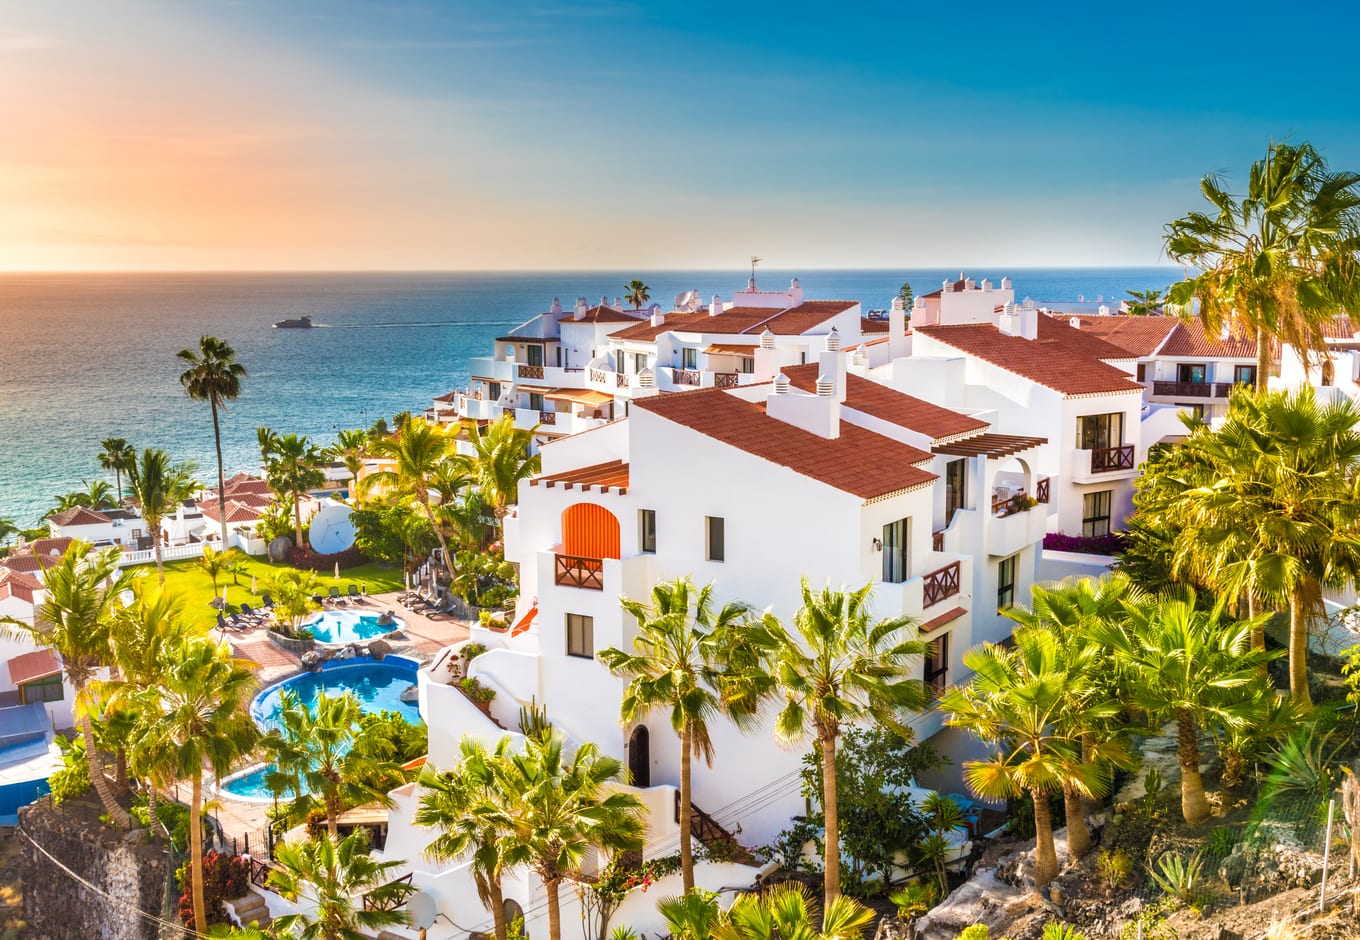 View of a seaside hotel surrounded by palm trees in Tenerife, Canary Islands, Spain.